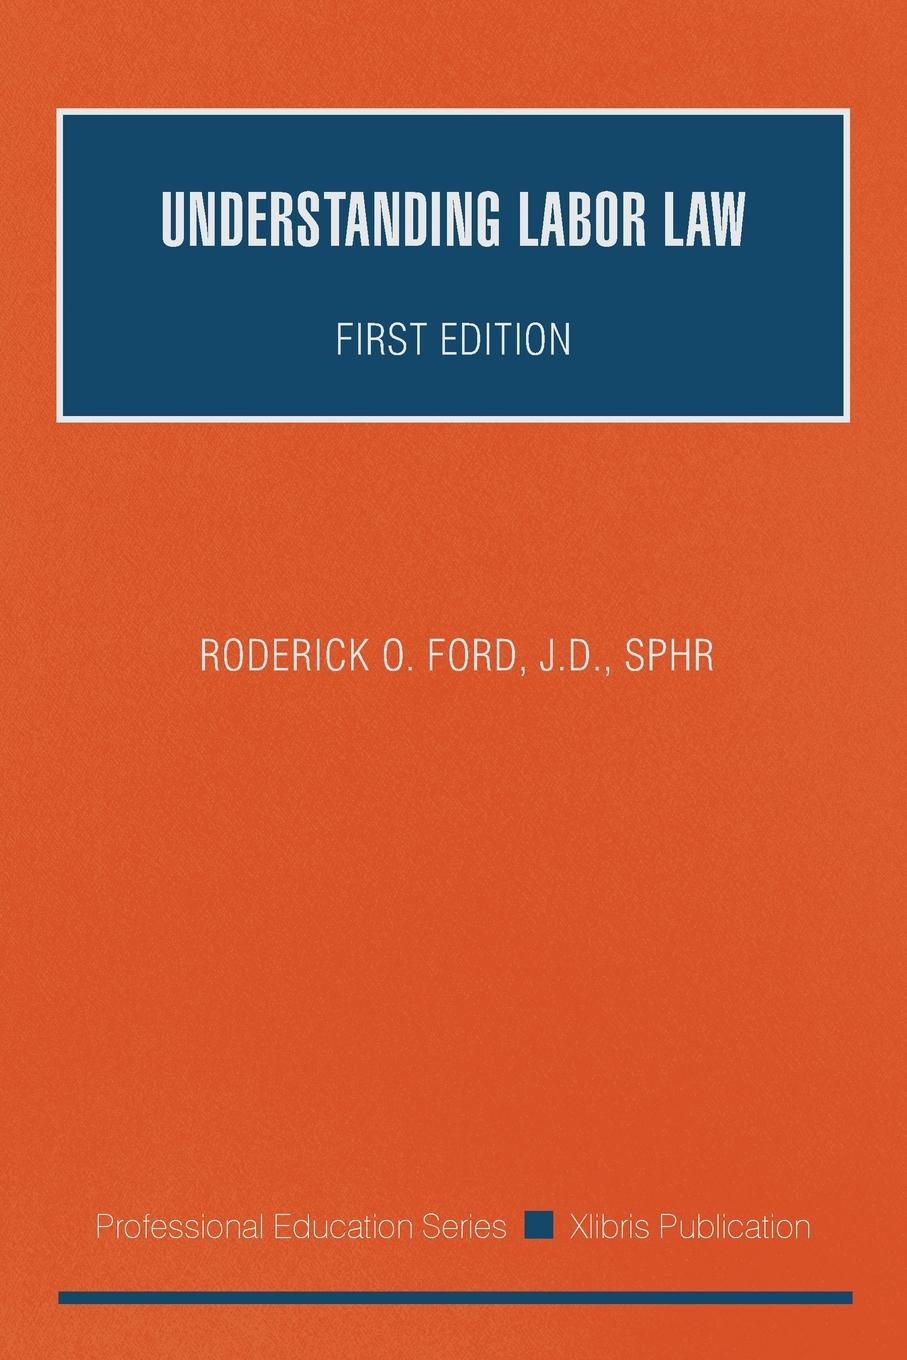 J.D. SPHR Roderick O. Ford Understanding Labor Law. First Edition